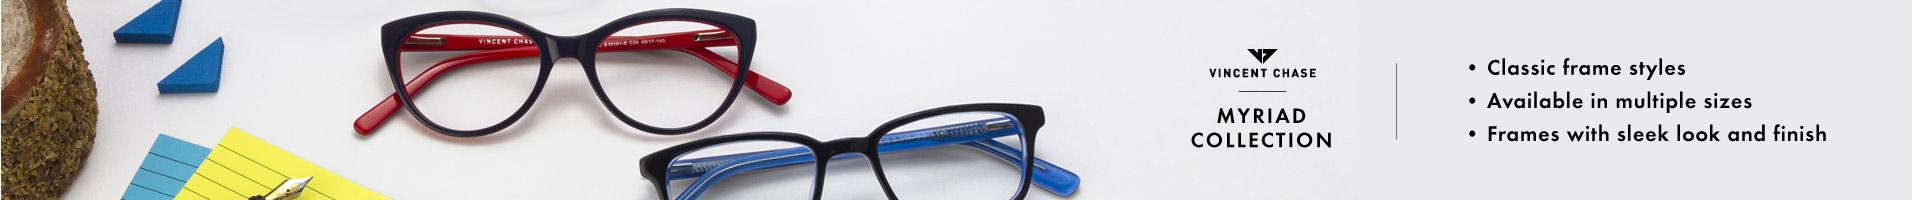 Myriad By Vincent Chase Eyeglasses - Buy Myriad By Vincent Chase ...